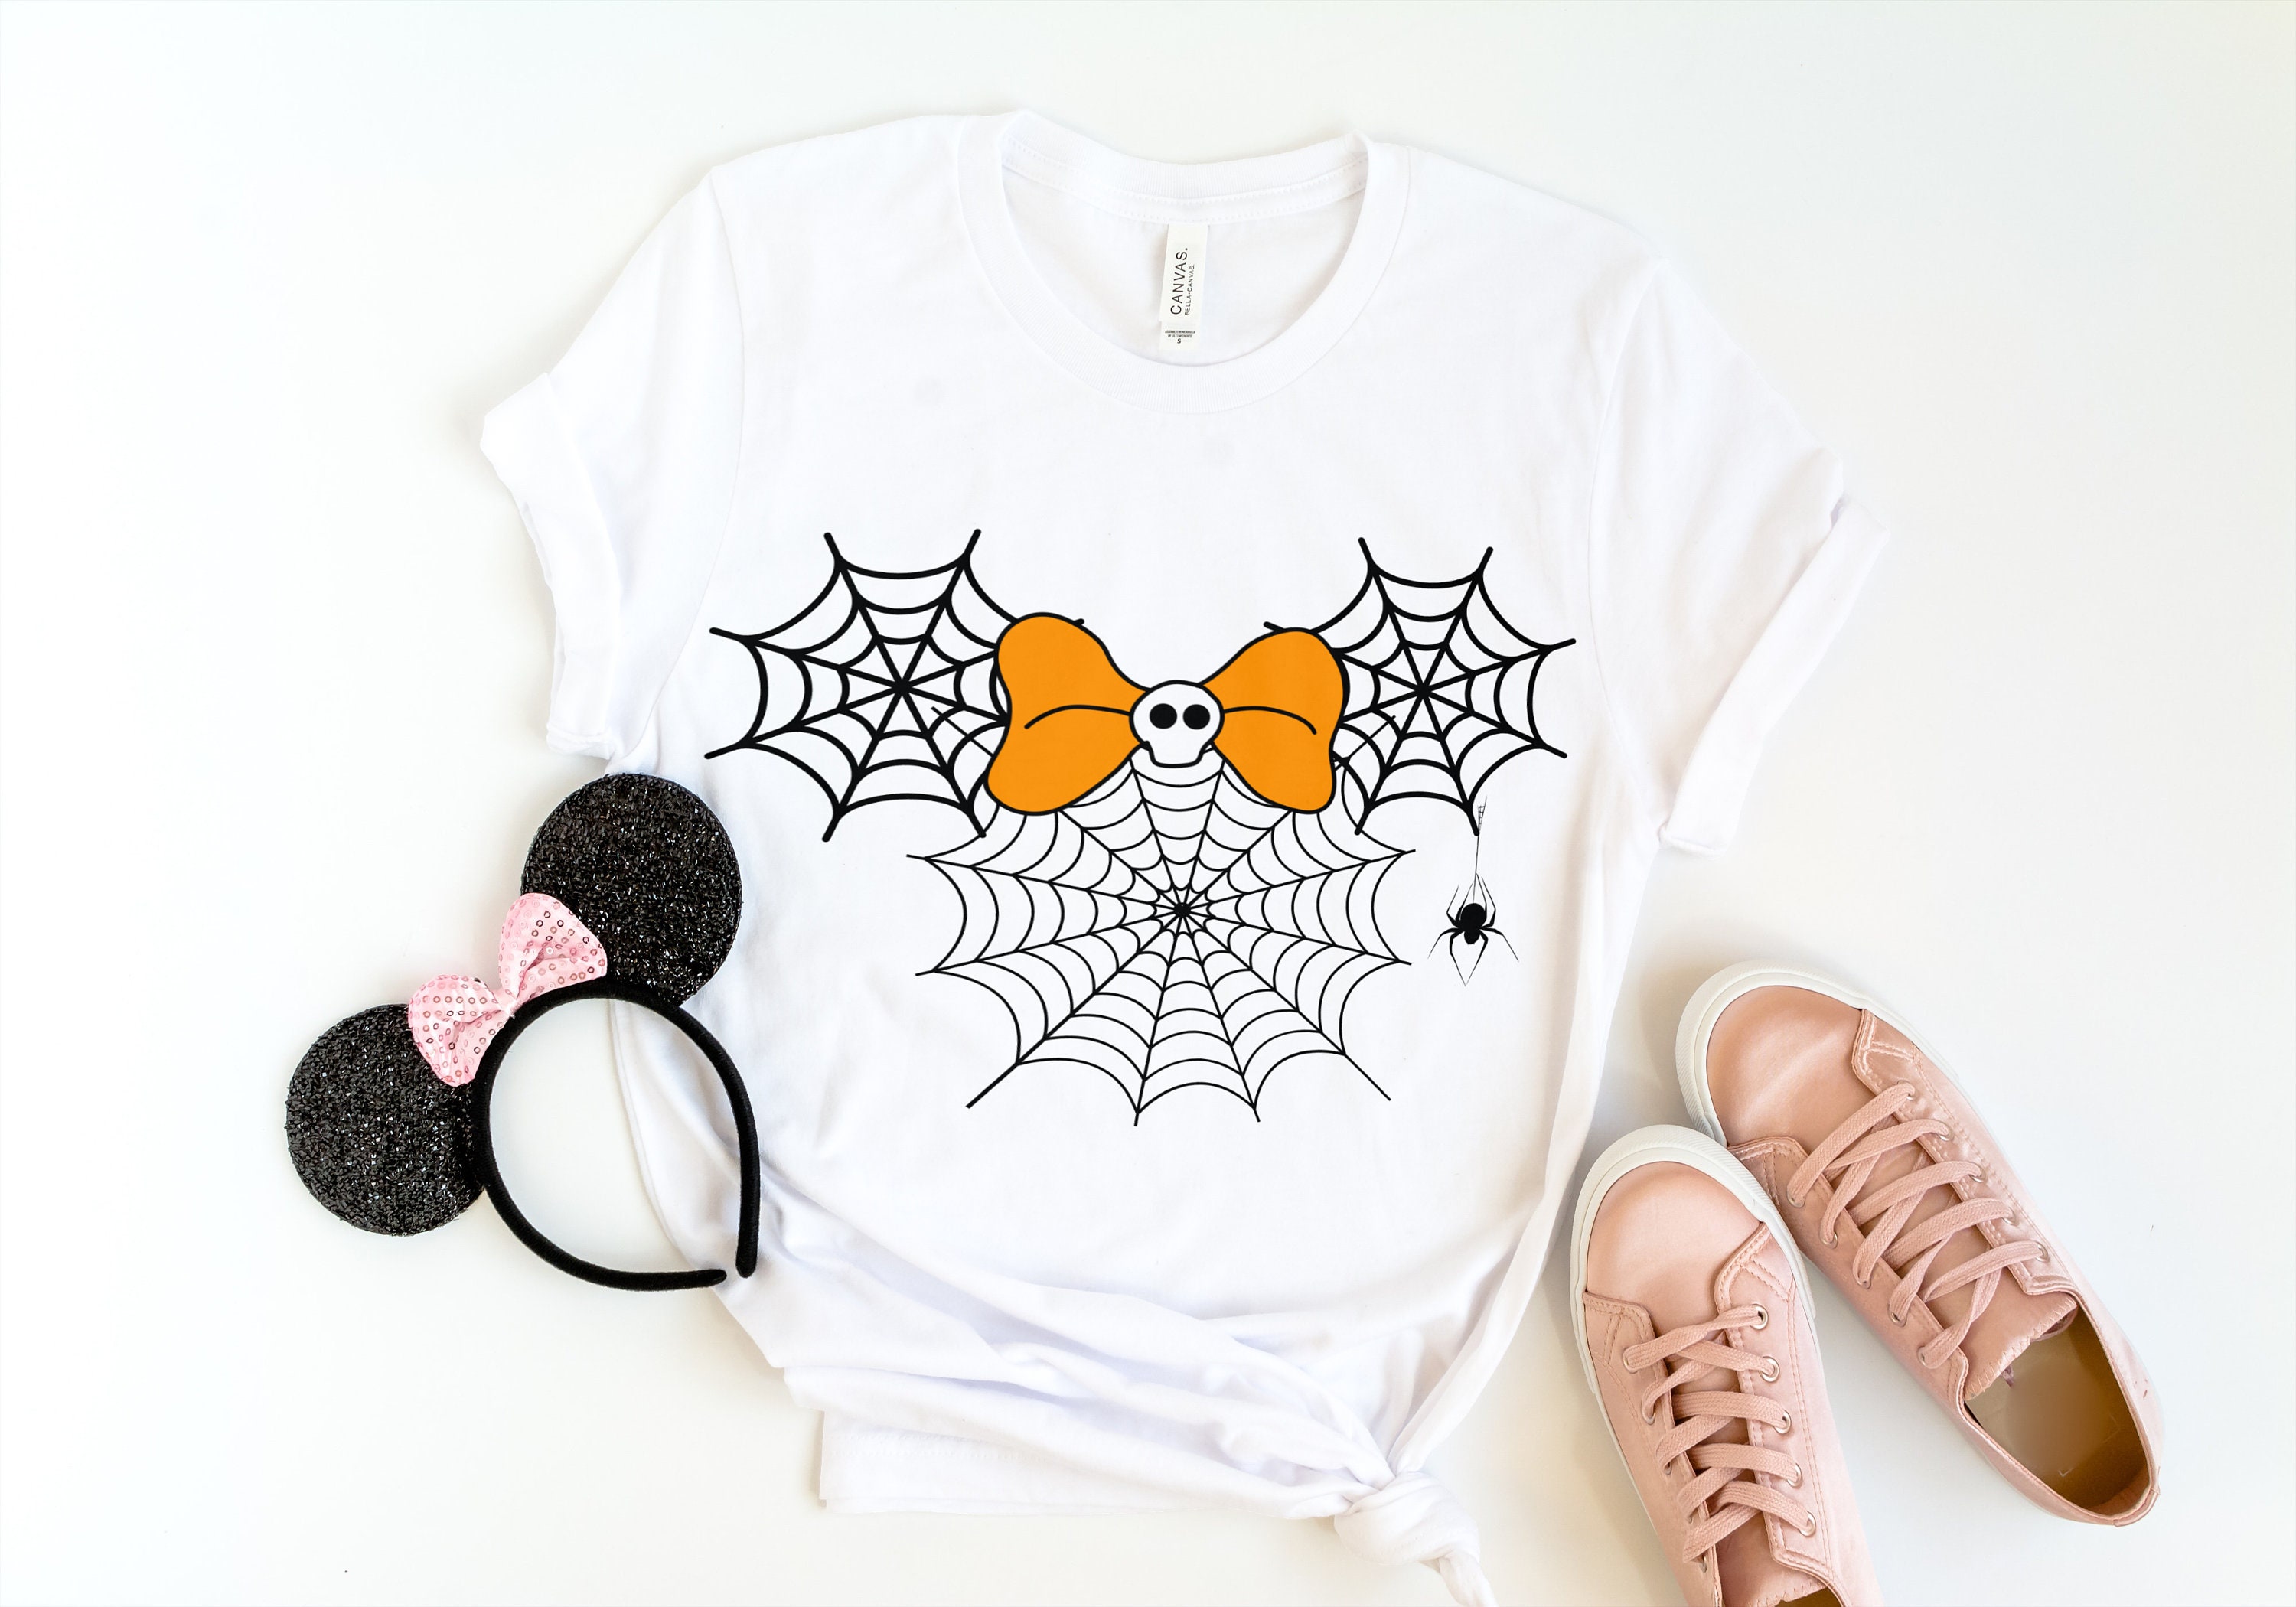 Discover Minnie Mouse Spider Web Halloween Shirt. Halloween Spider Web Shirt Disney Halloween Shirt Minnie Mouse Halloween Shirt Disney Fall Shirt